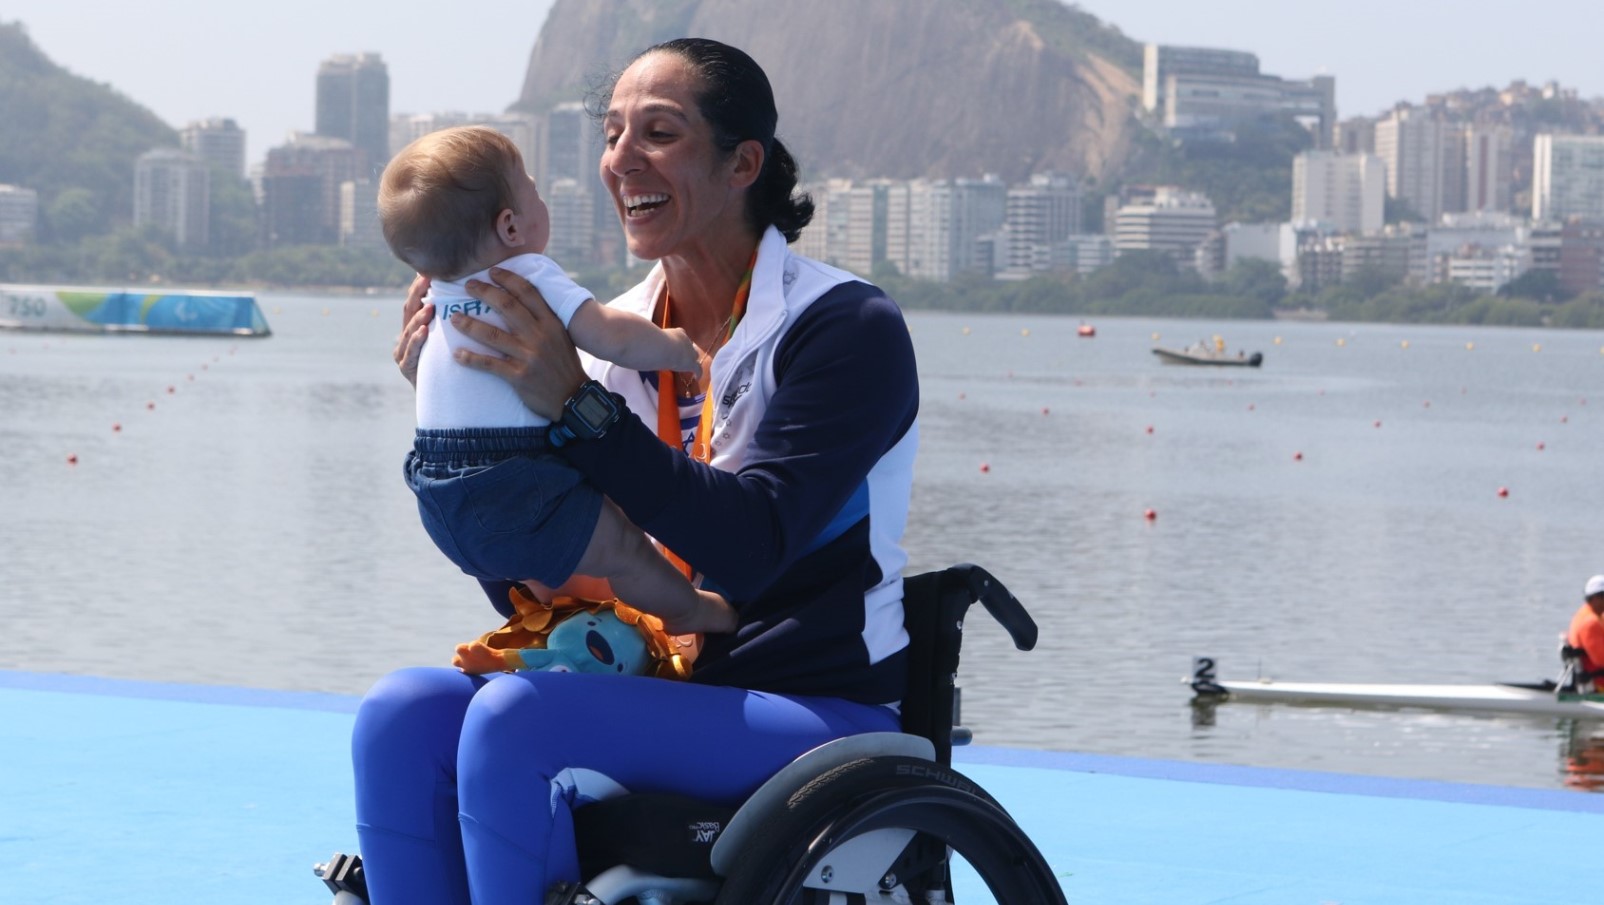 Moran Samuel's partner and son were there to see her big moment in Rio. The baby's name is Arad, Hebrew for "bronze." Photo by Keren Isaacson/Israel Olympic Committee